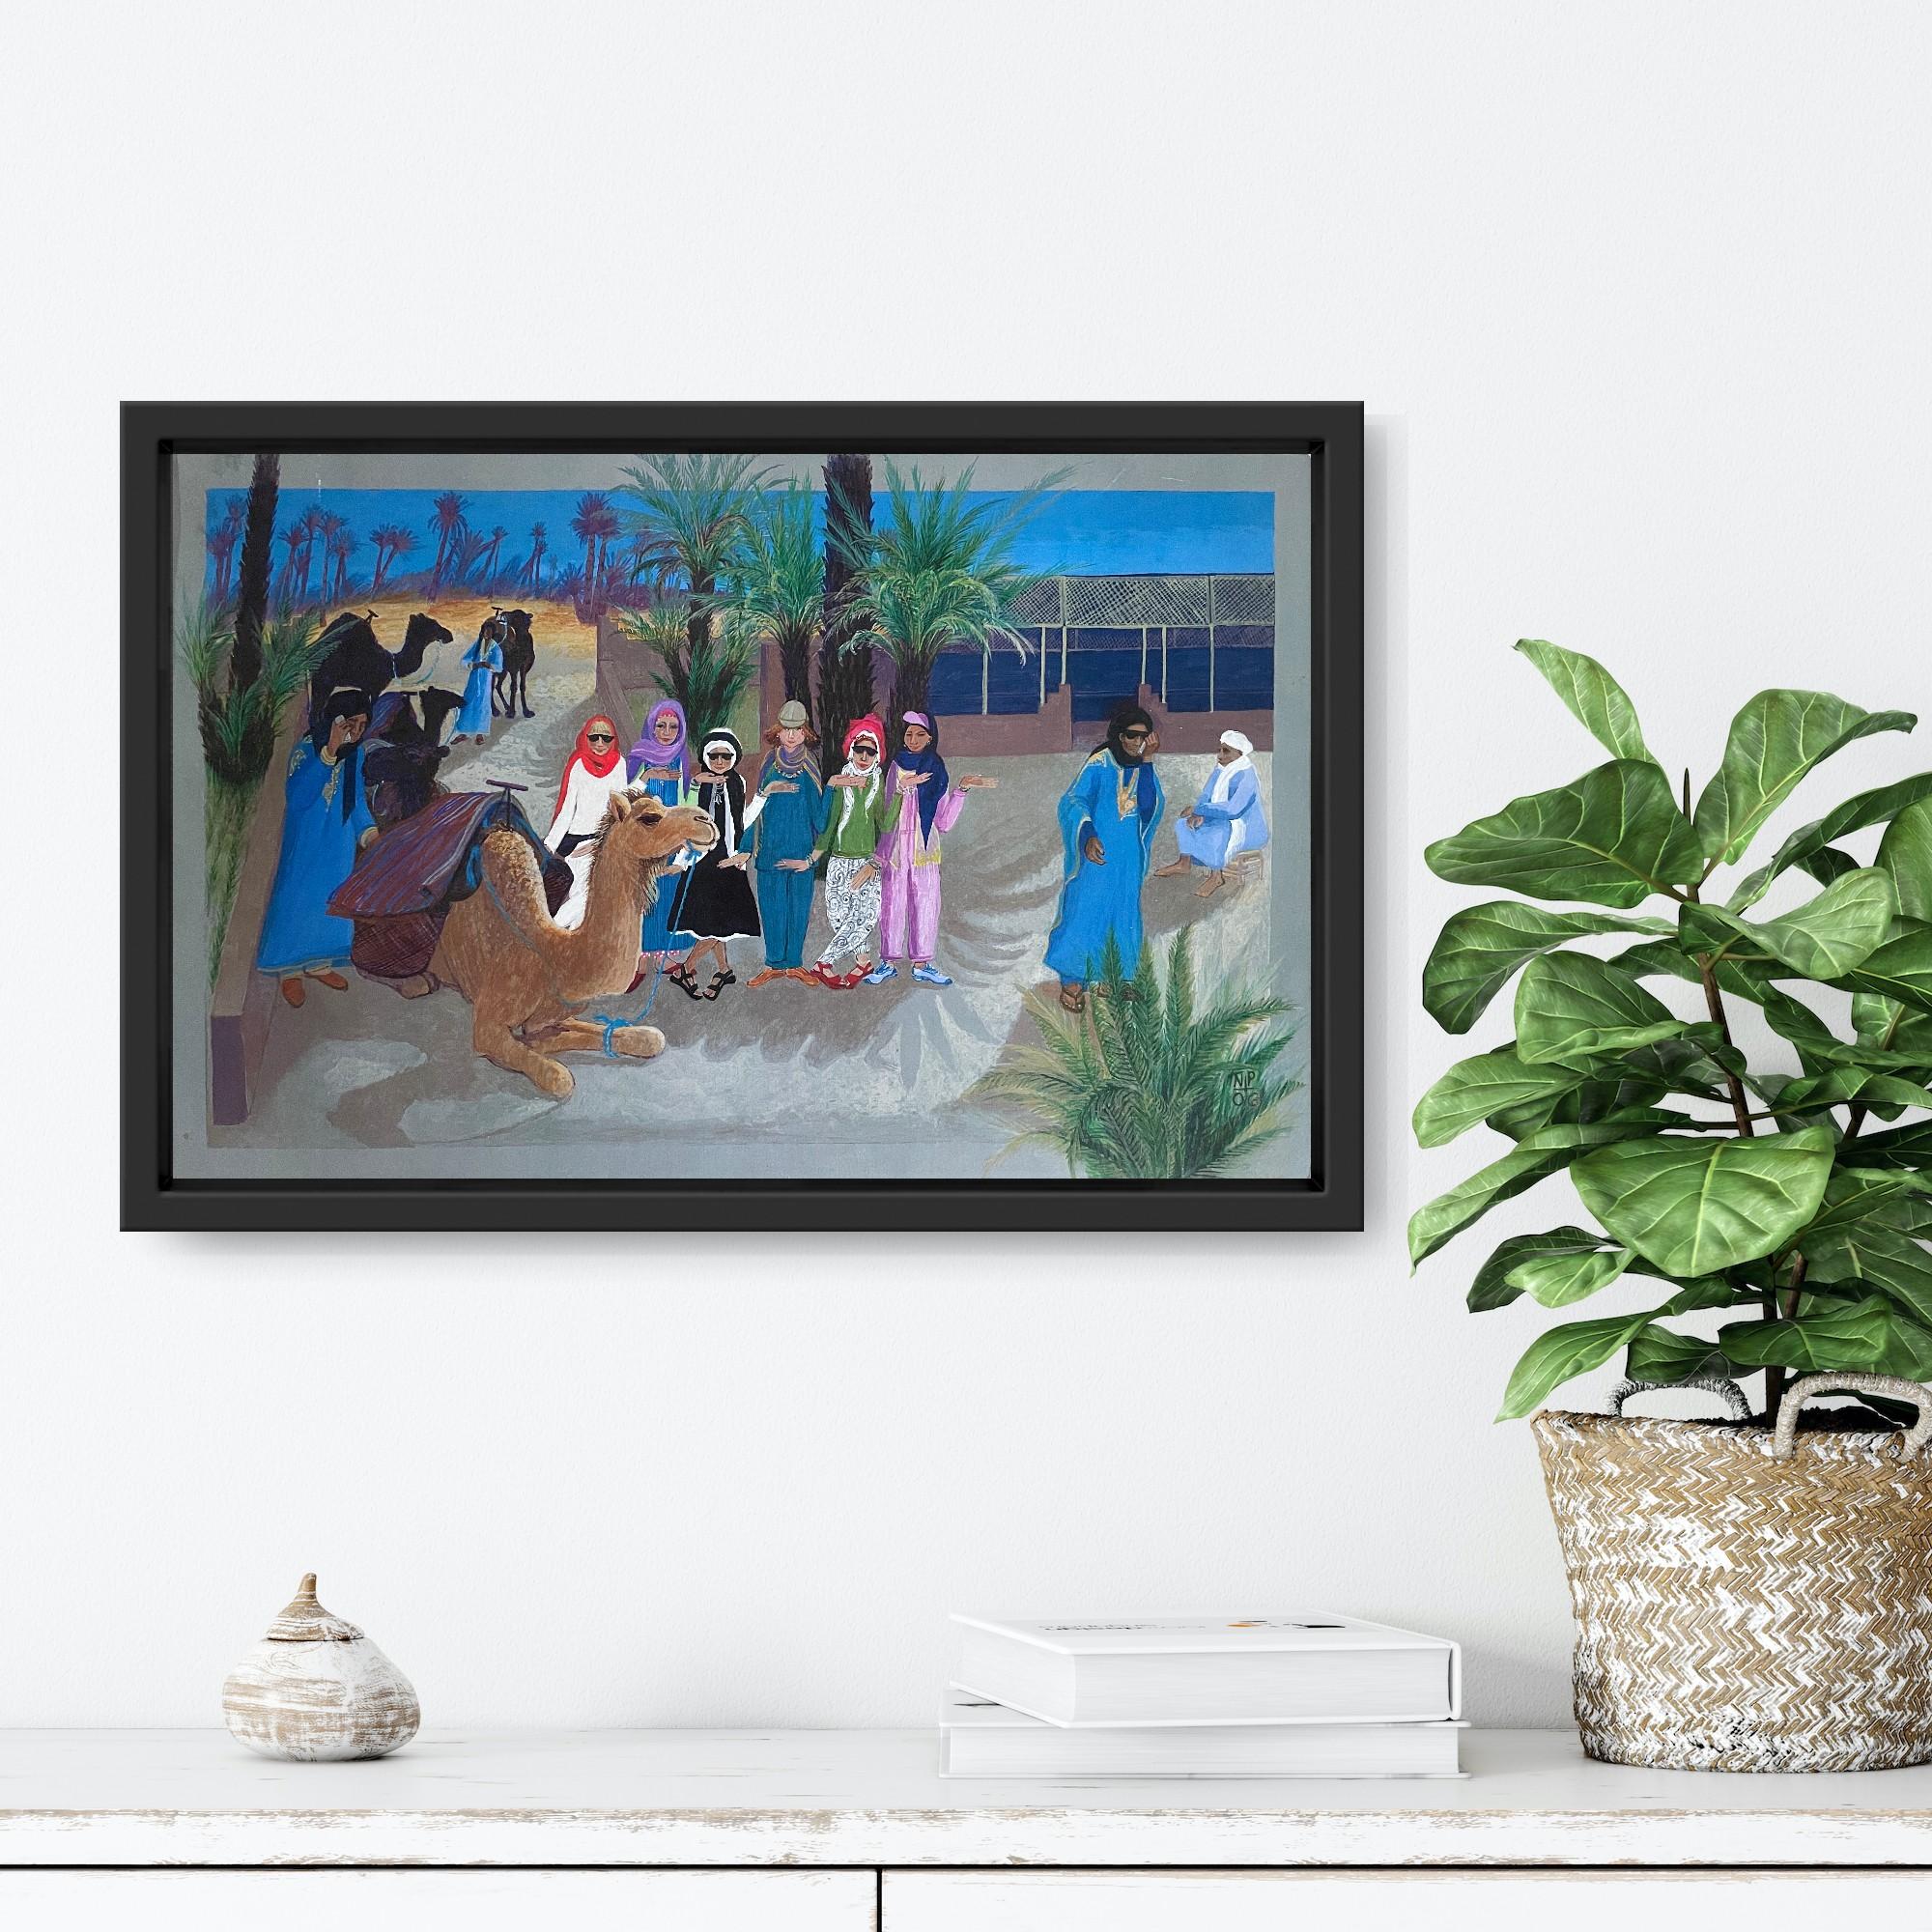 This vibrant Folk Art Limited Edition Print made from a painting on board is by the fabulous British Canadian artist Nancy Patterson. It comes from her series ‘Days in the Desert Sun, Nights Under the Magical Moon’, a compelling set of works in the